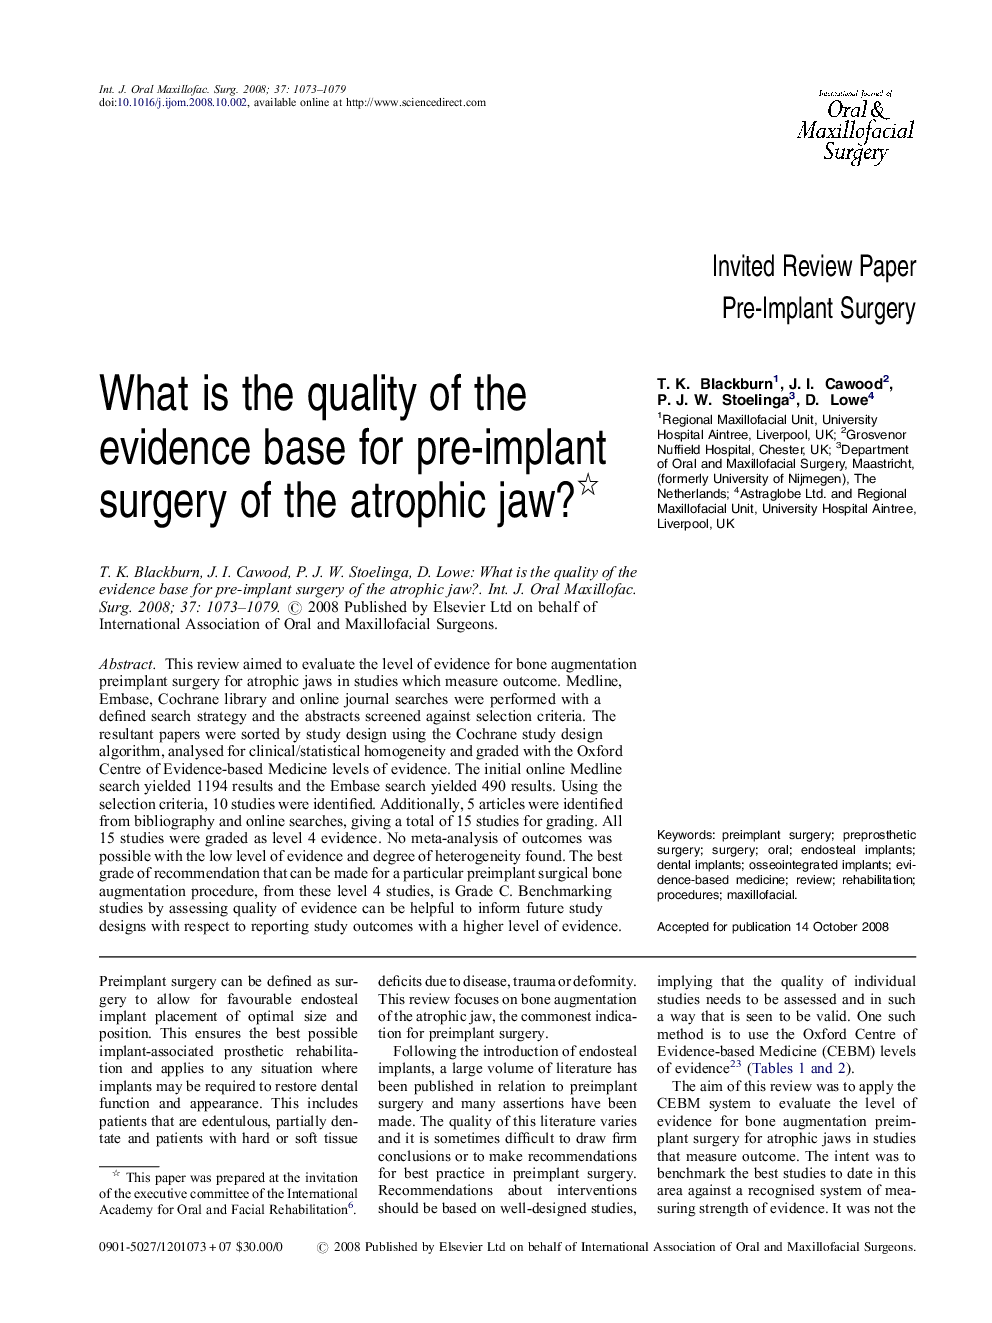 What is the quality of the evidence base for pre-implant surgery of the atrophic jaw? 